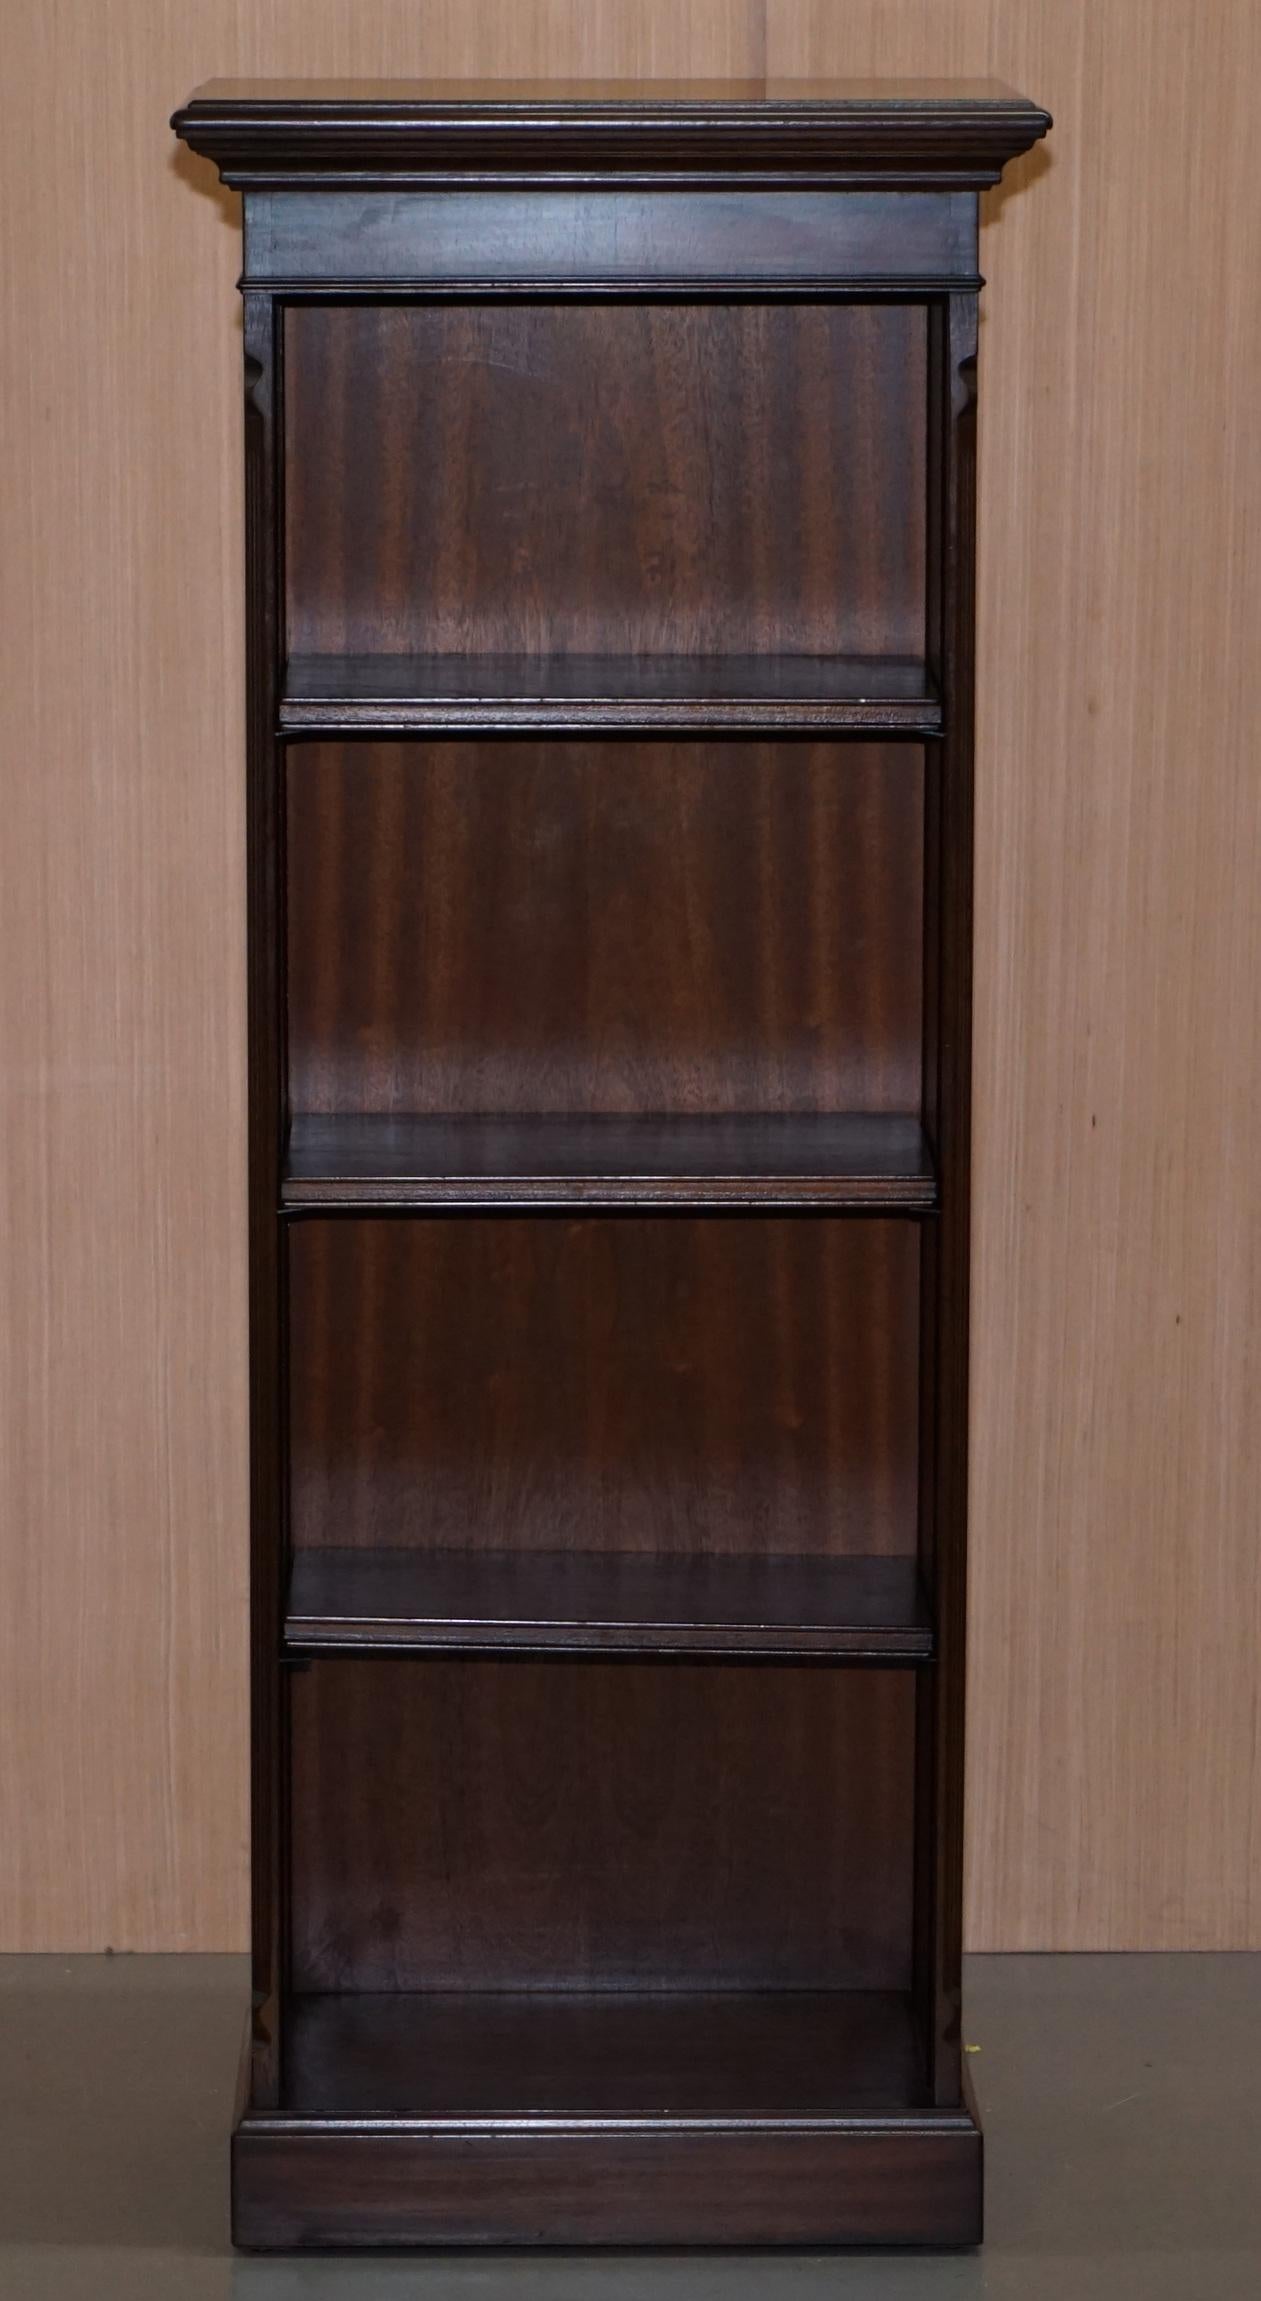 We are delighted to offer for sale this lovely good sized mahogany bookcase with height adjustable shelves

A very good looking and decorative functional library bookcase, pictured with three shelves however there are four in total

We have